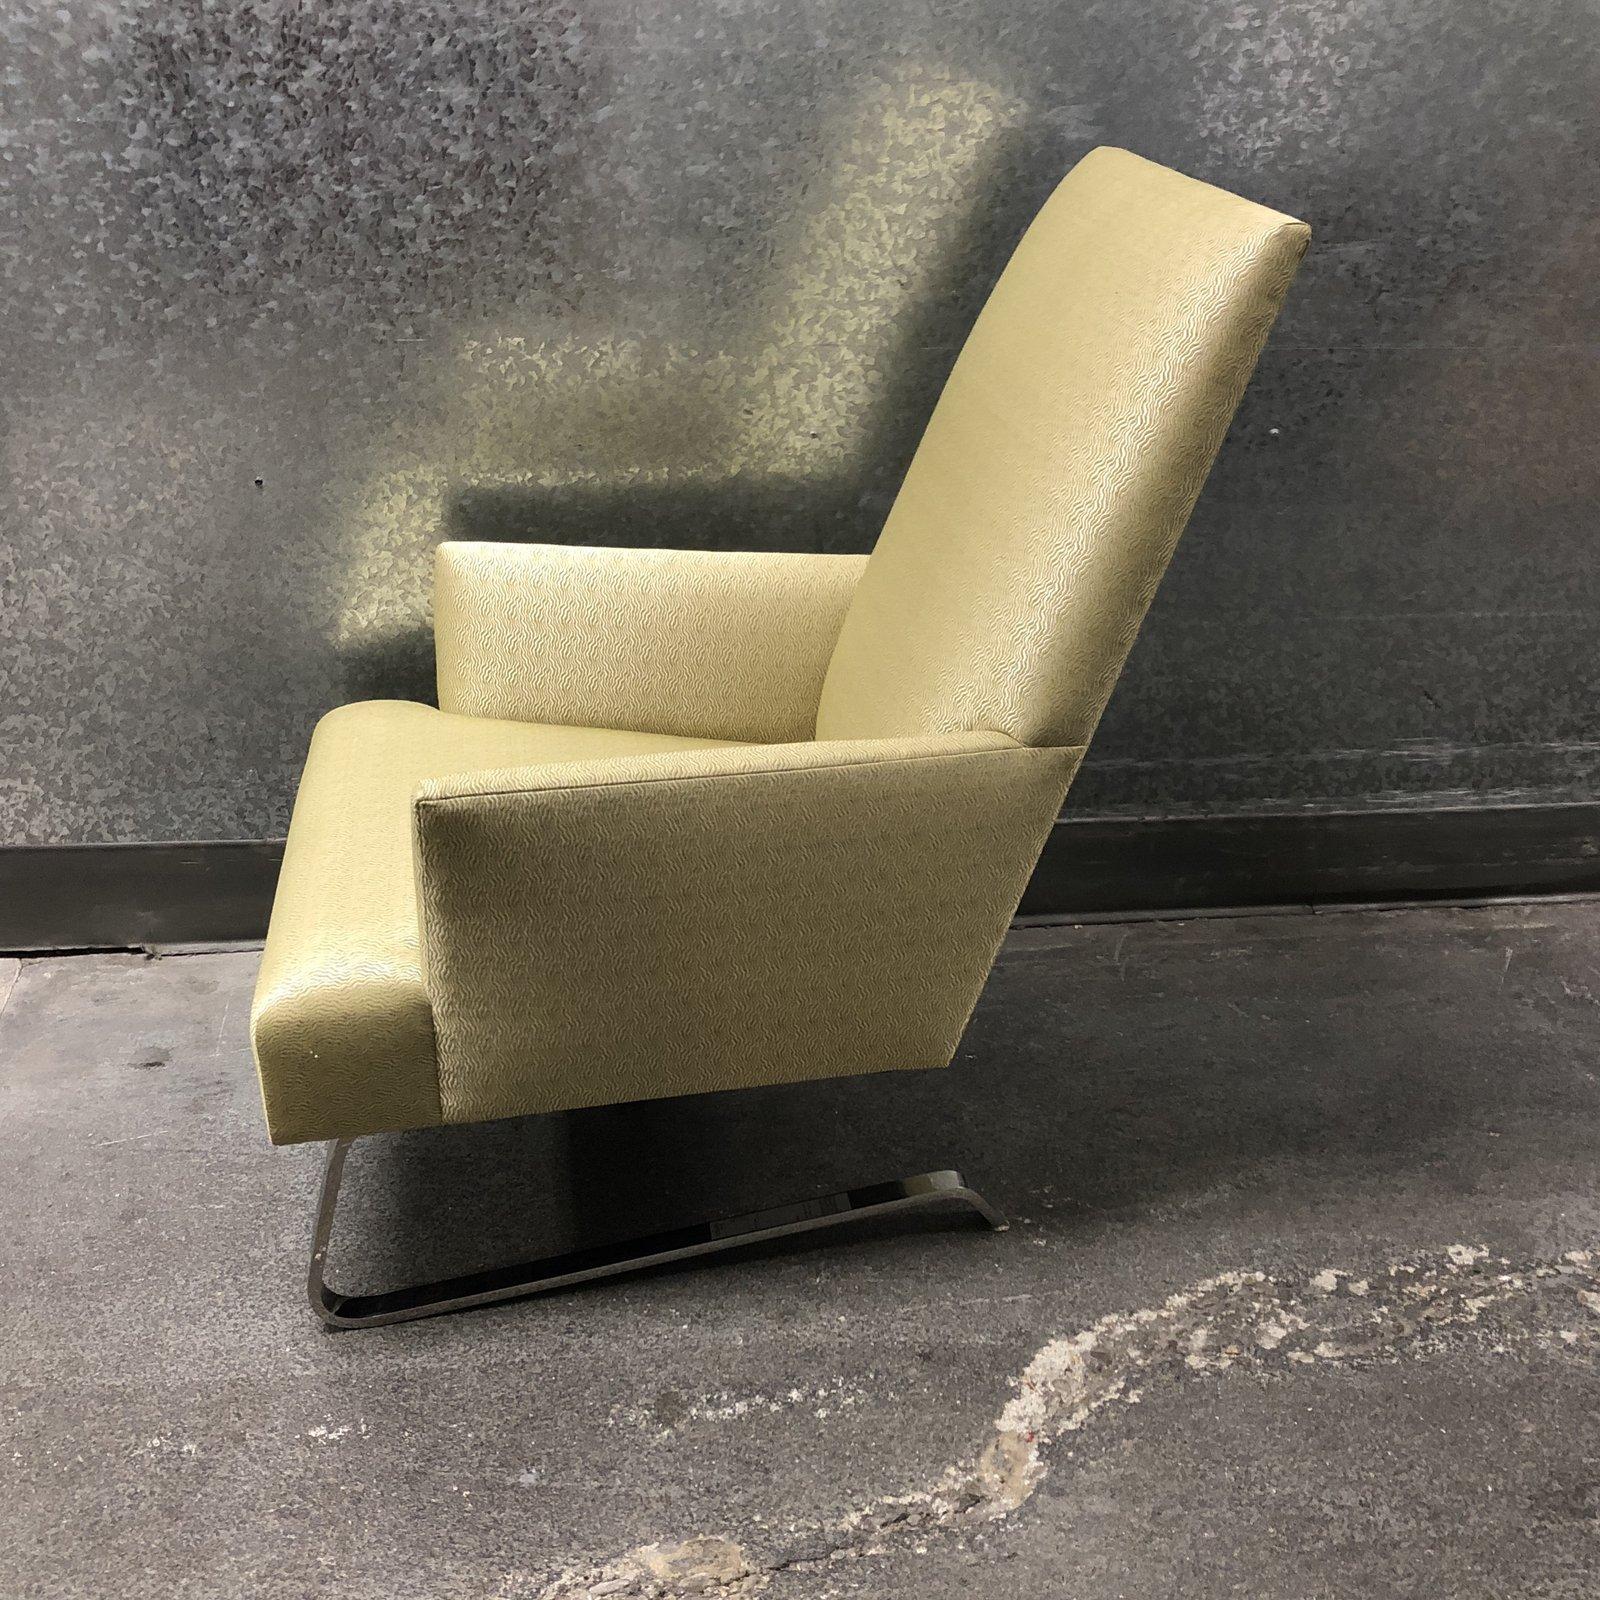 A Odeon club chair by Donghia. This piece features a dazzling patterned fabric, soft shapes, and a metal C framed base in a silver reflective finish. The high back, paired with the movement of the C framed base make this club chair as comfortable to